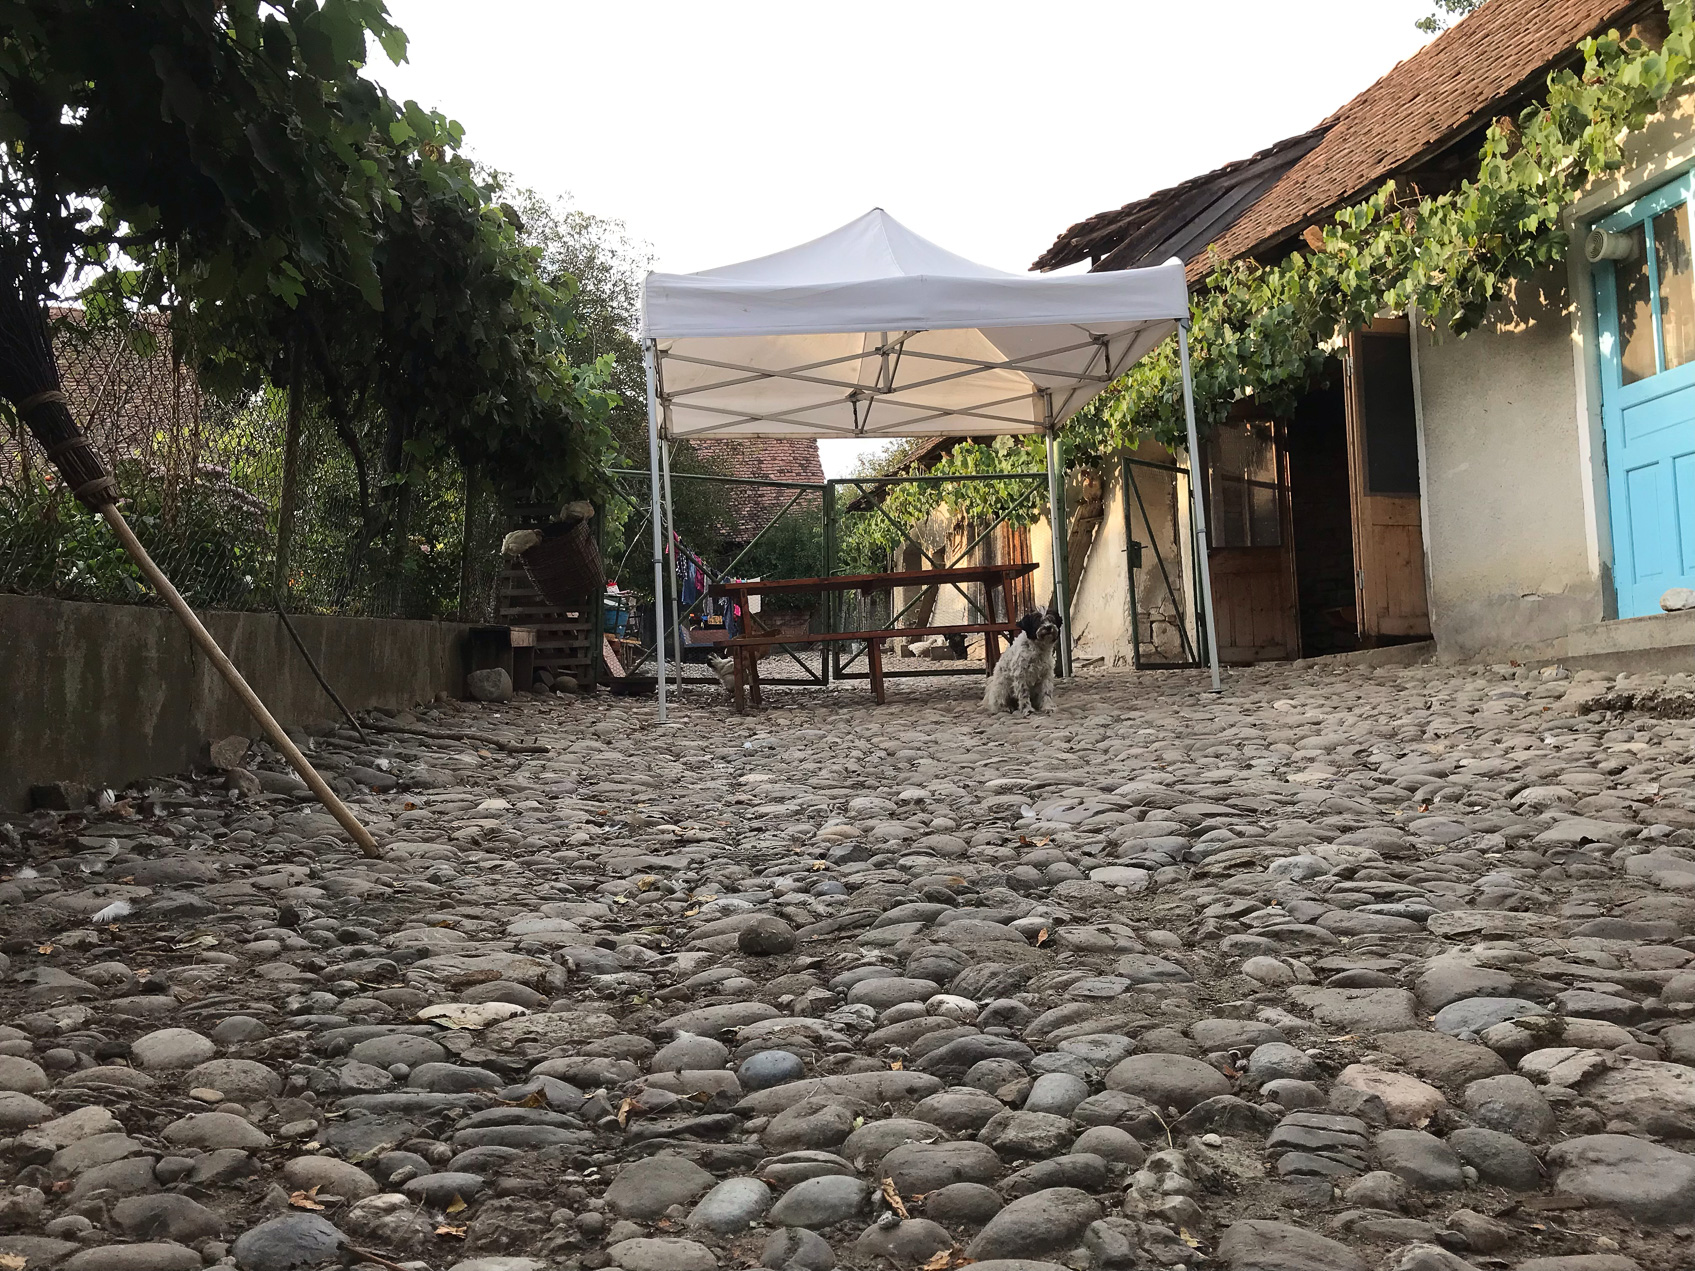 We are being treated to dinner by residents of another house on the main street.  The garden is on the left, the dining alcove on the right.  Chickens, ducks, geese and cats are about to join the dog in the cobbleway.